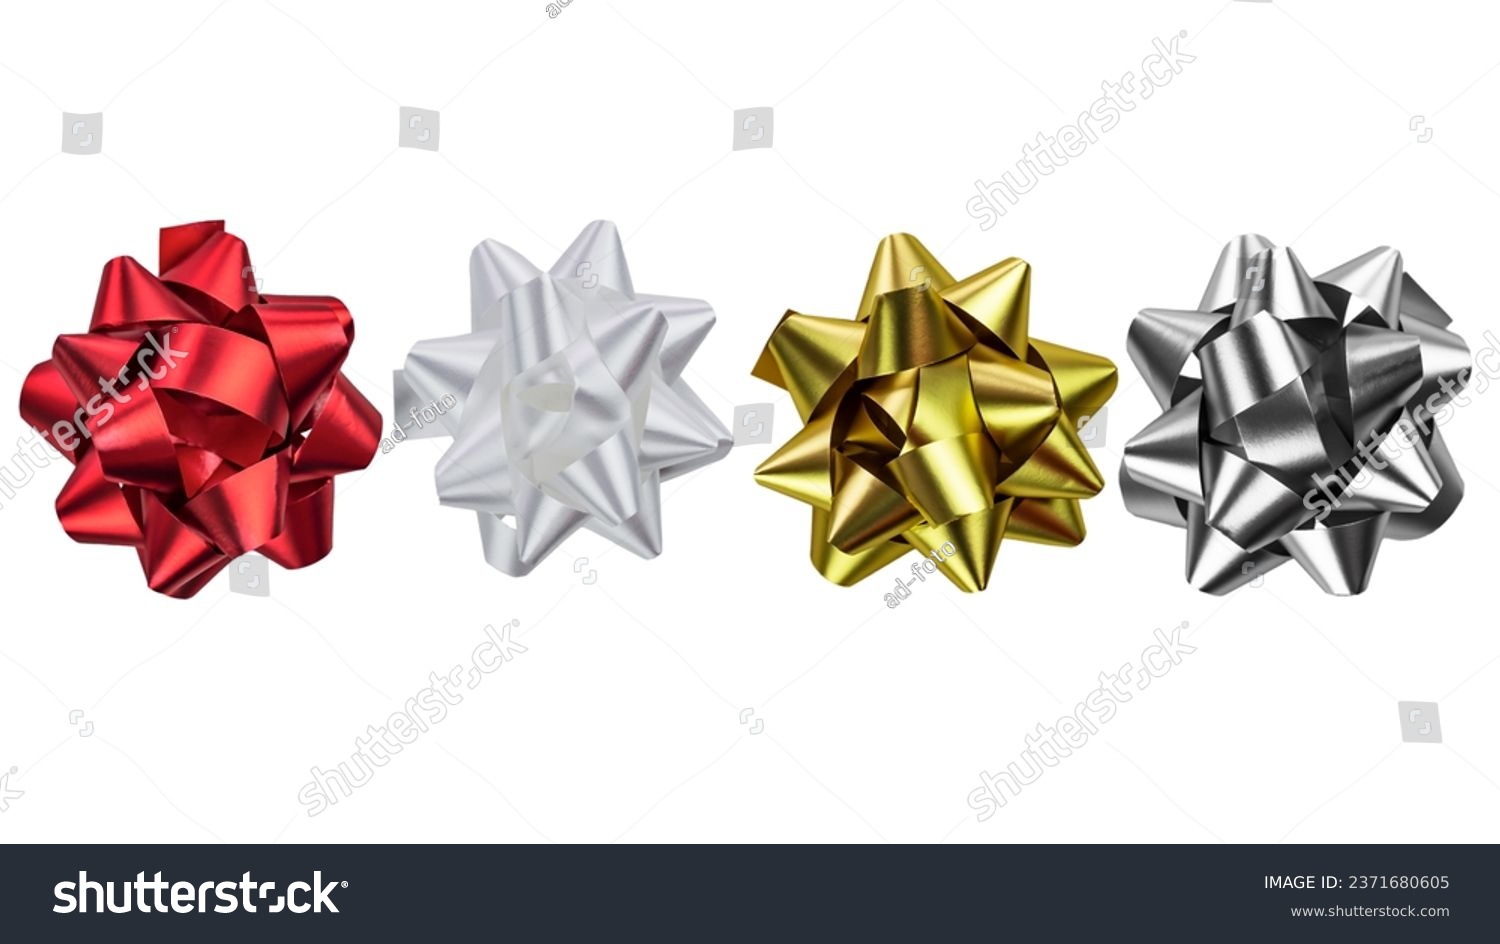 Set of neon foil bows, red, white, gold, silver color metallic with shadow on isolated white background. foil bow, decoration for holiday #2371680605